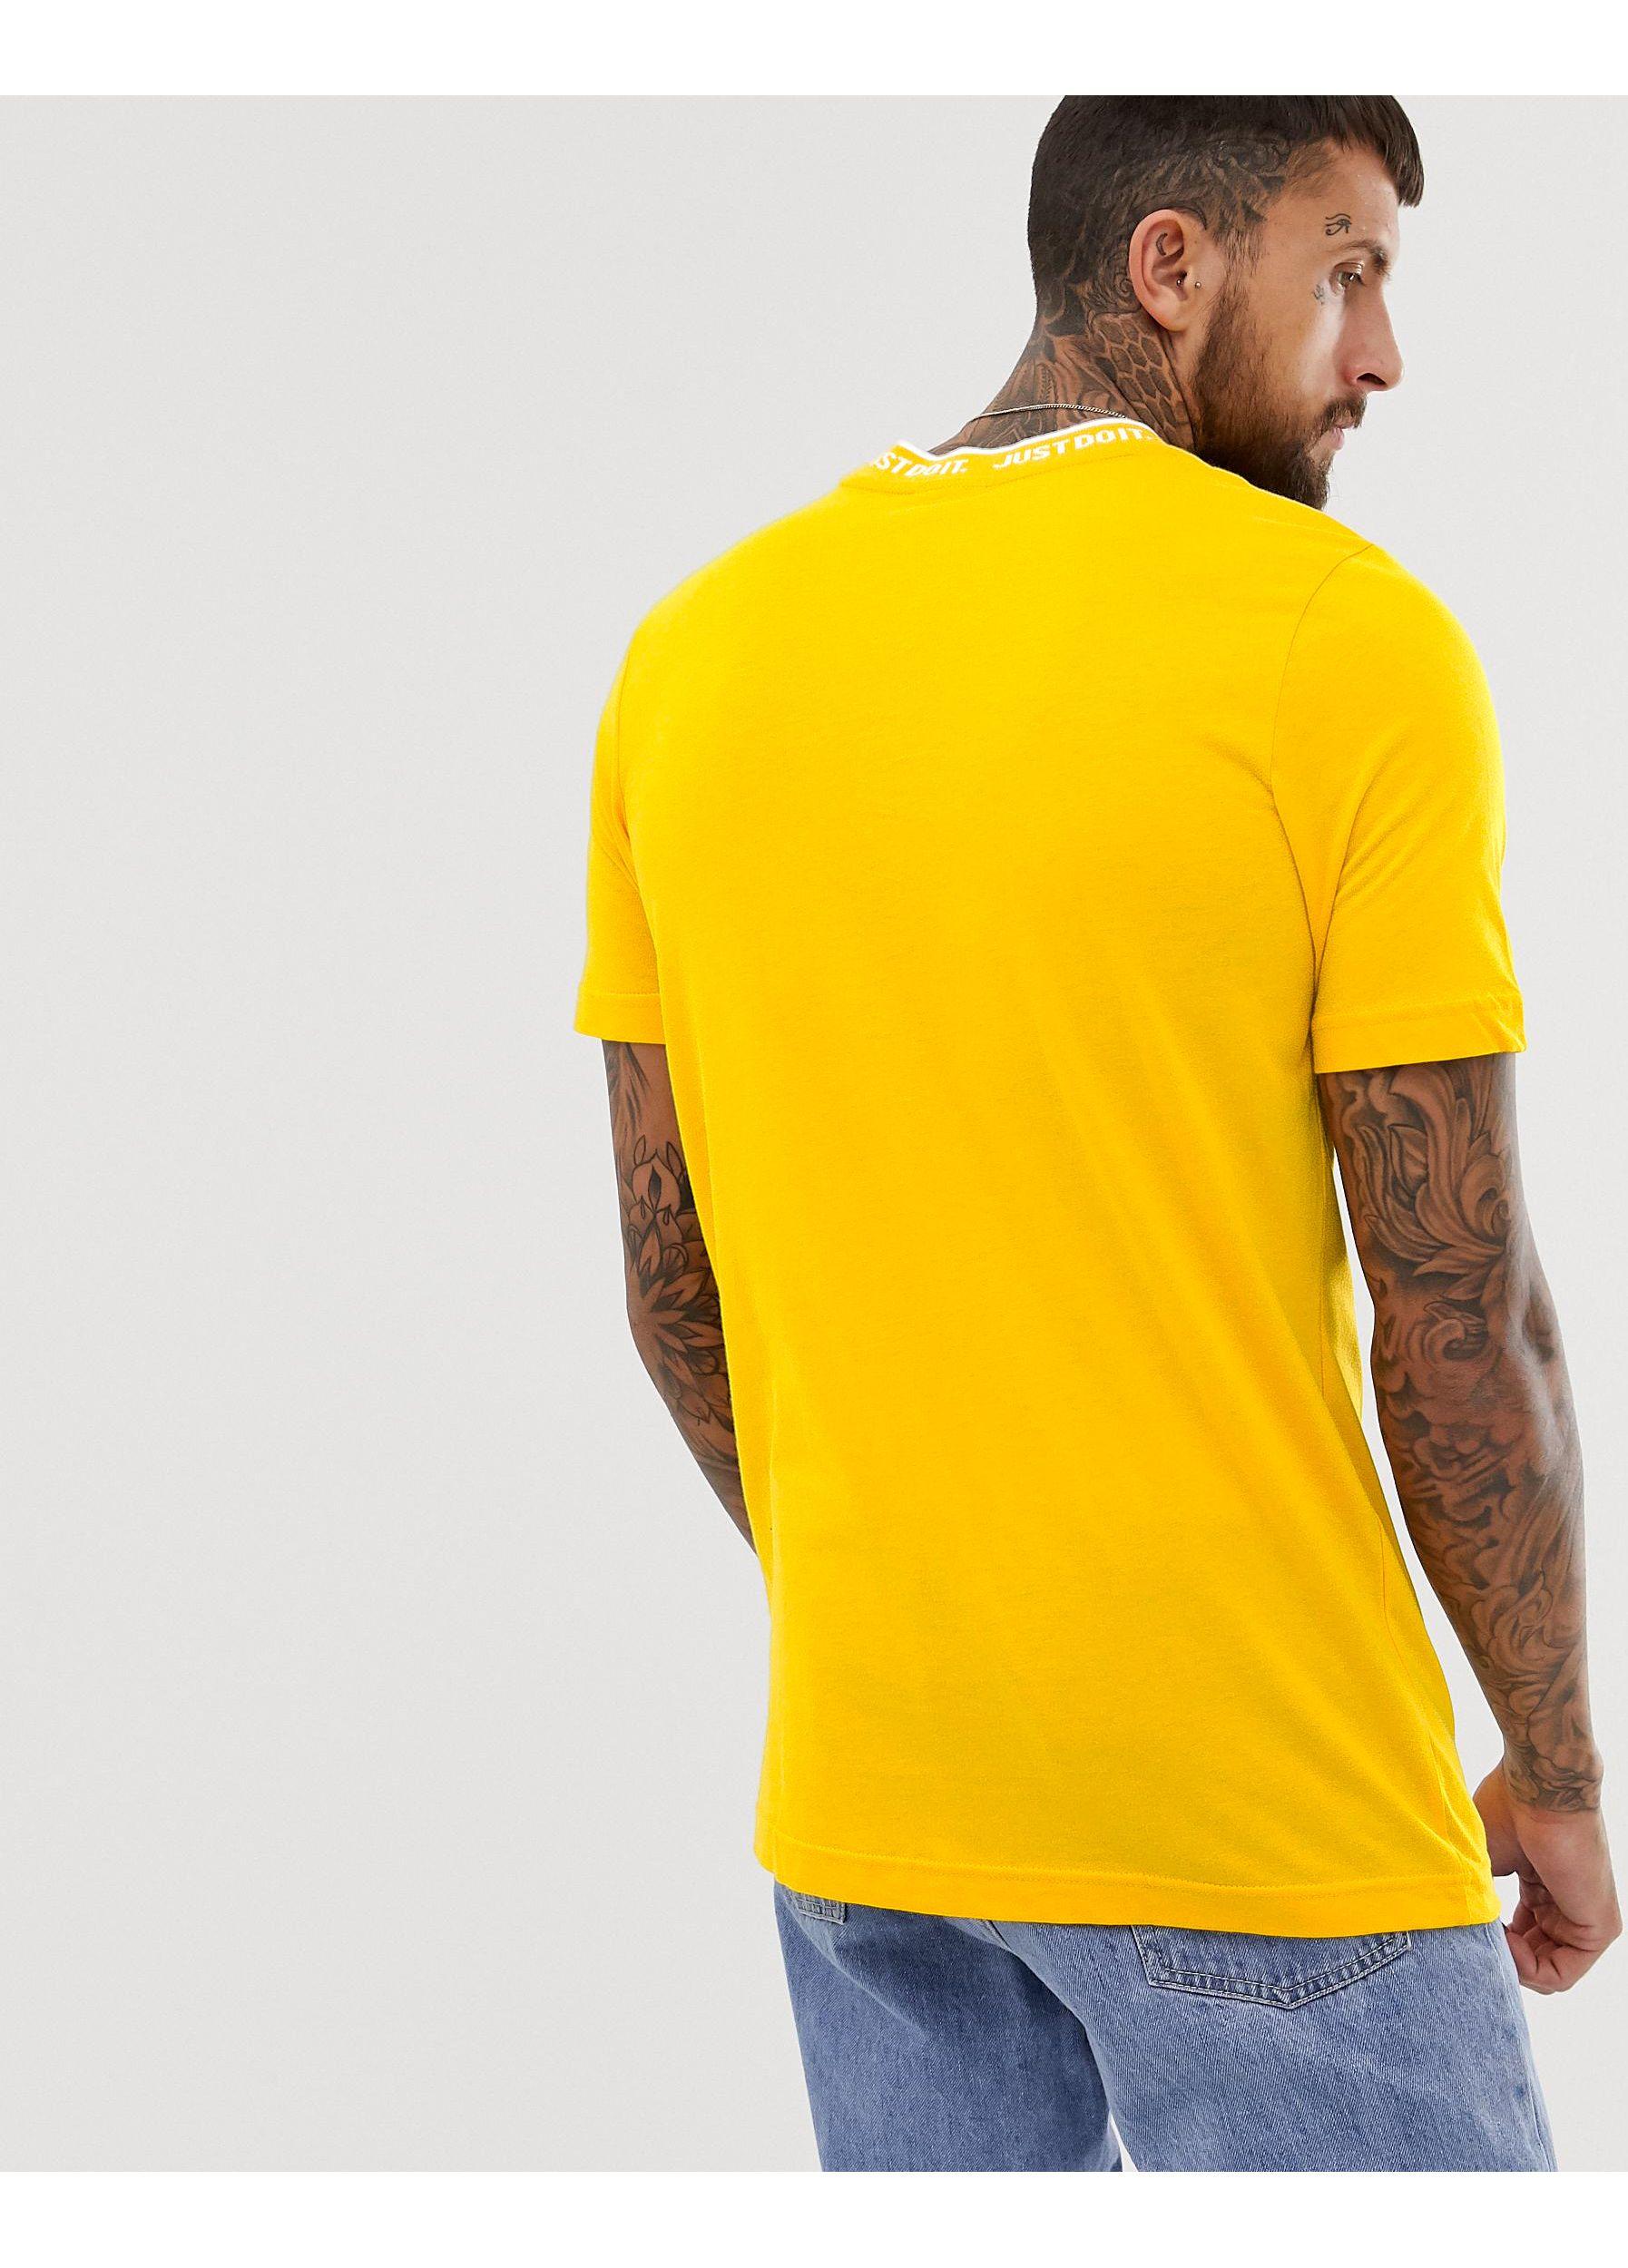 Nike Cotton Just Do It Logo T-shirt in Yellow for Men - Lyst